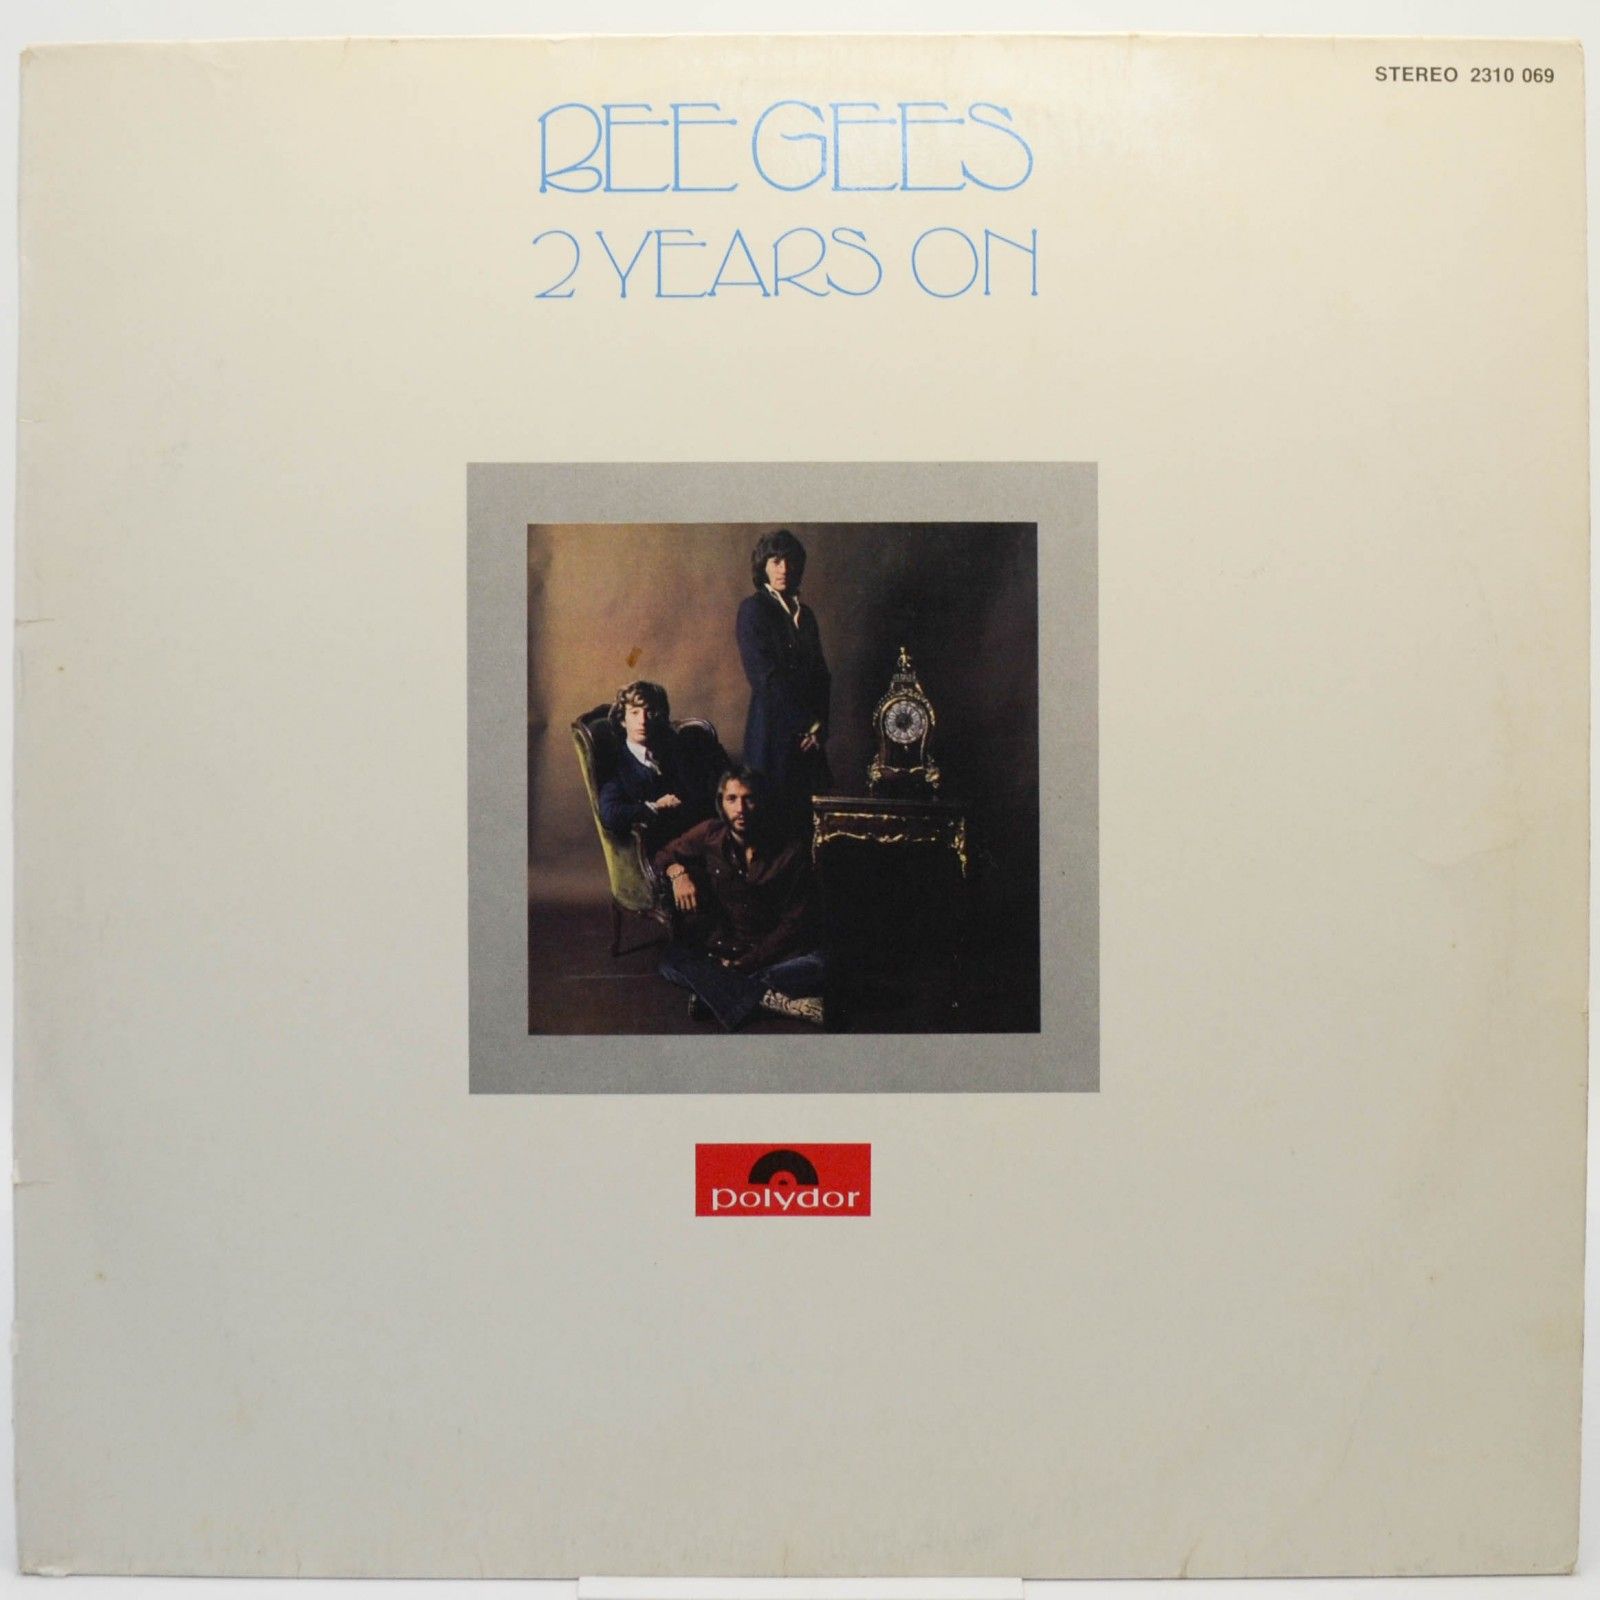 Bee Gees — 2 Years On, 1971